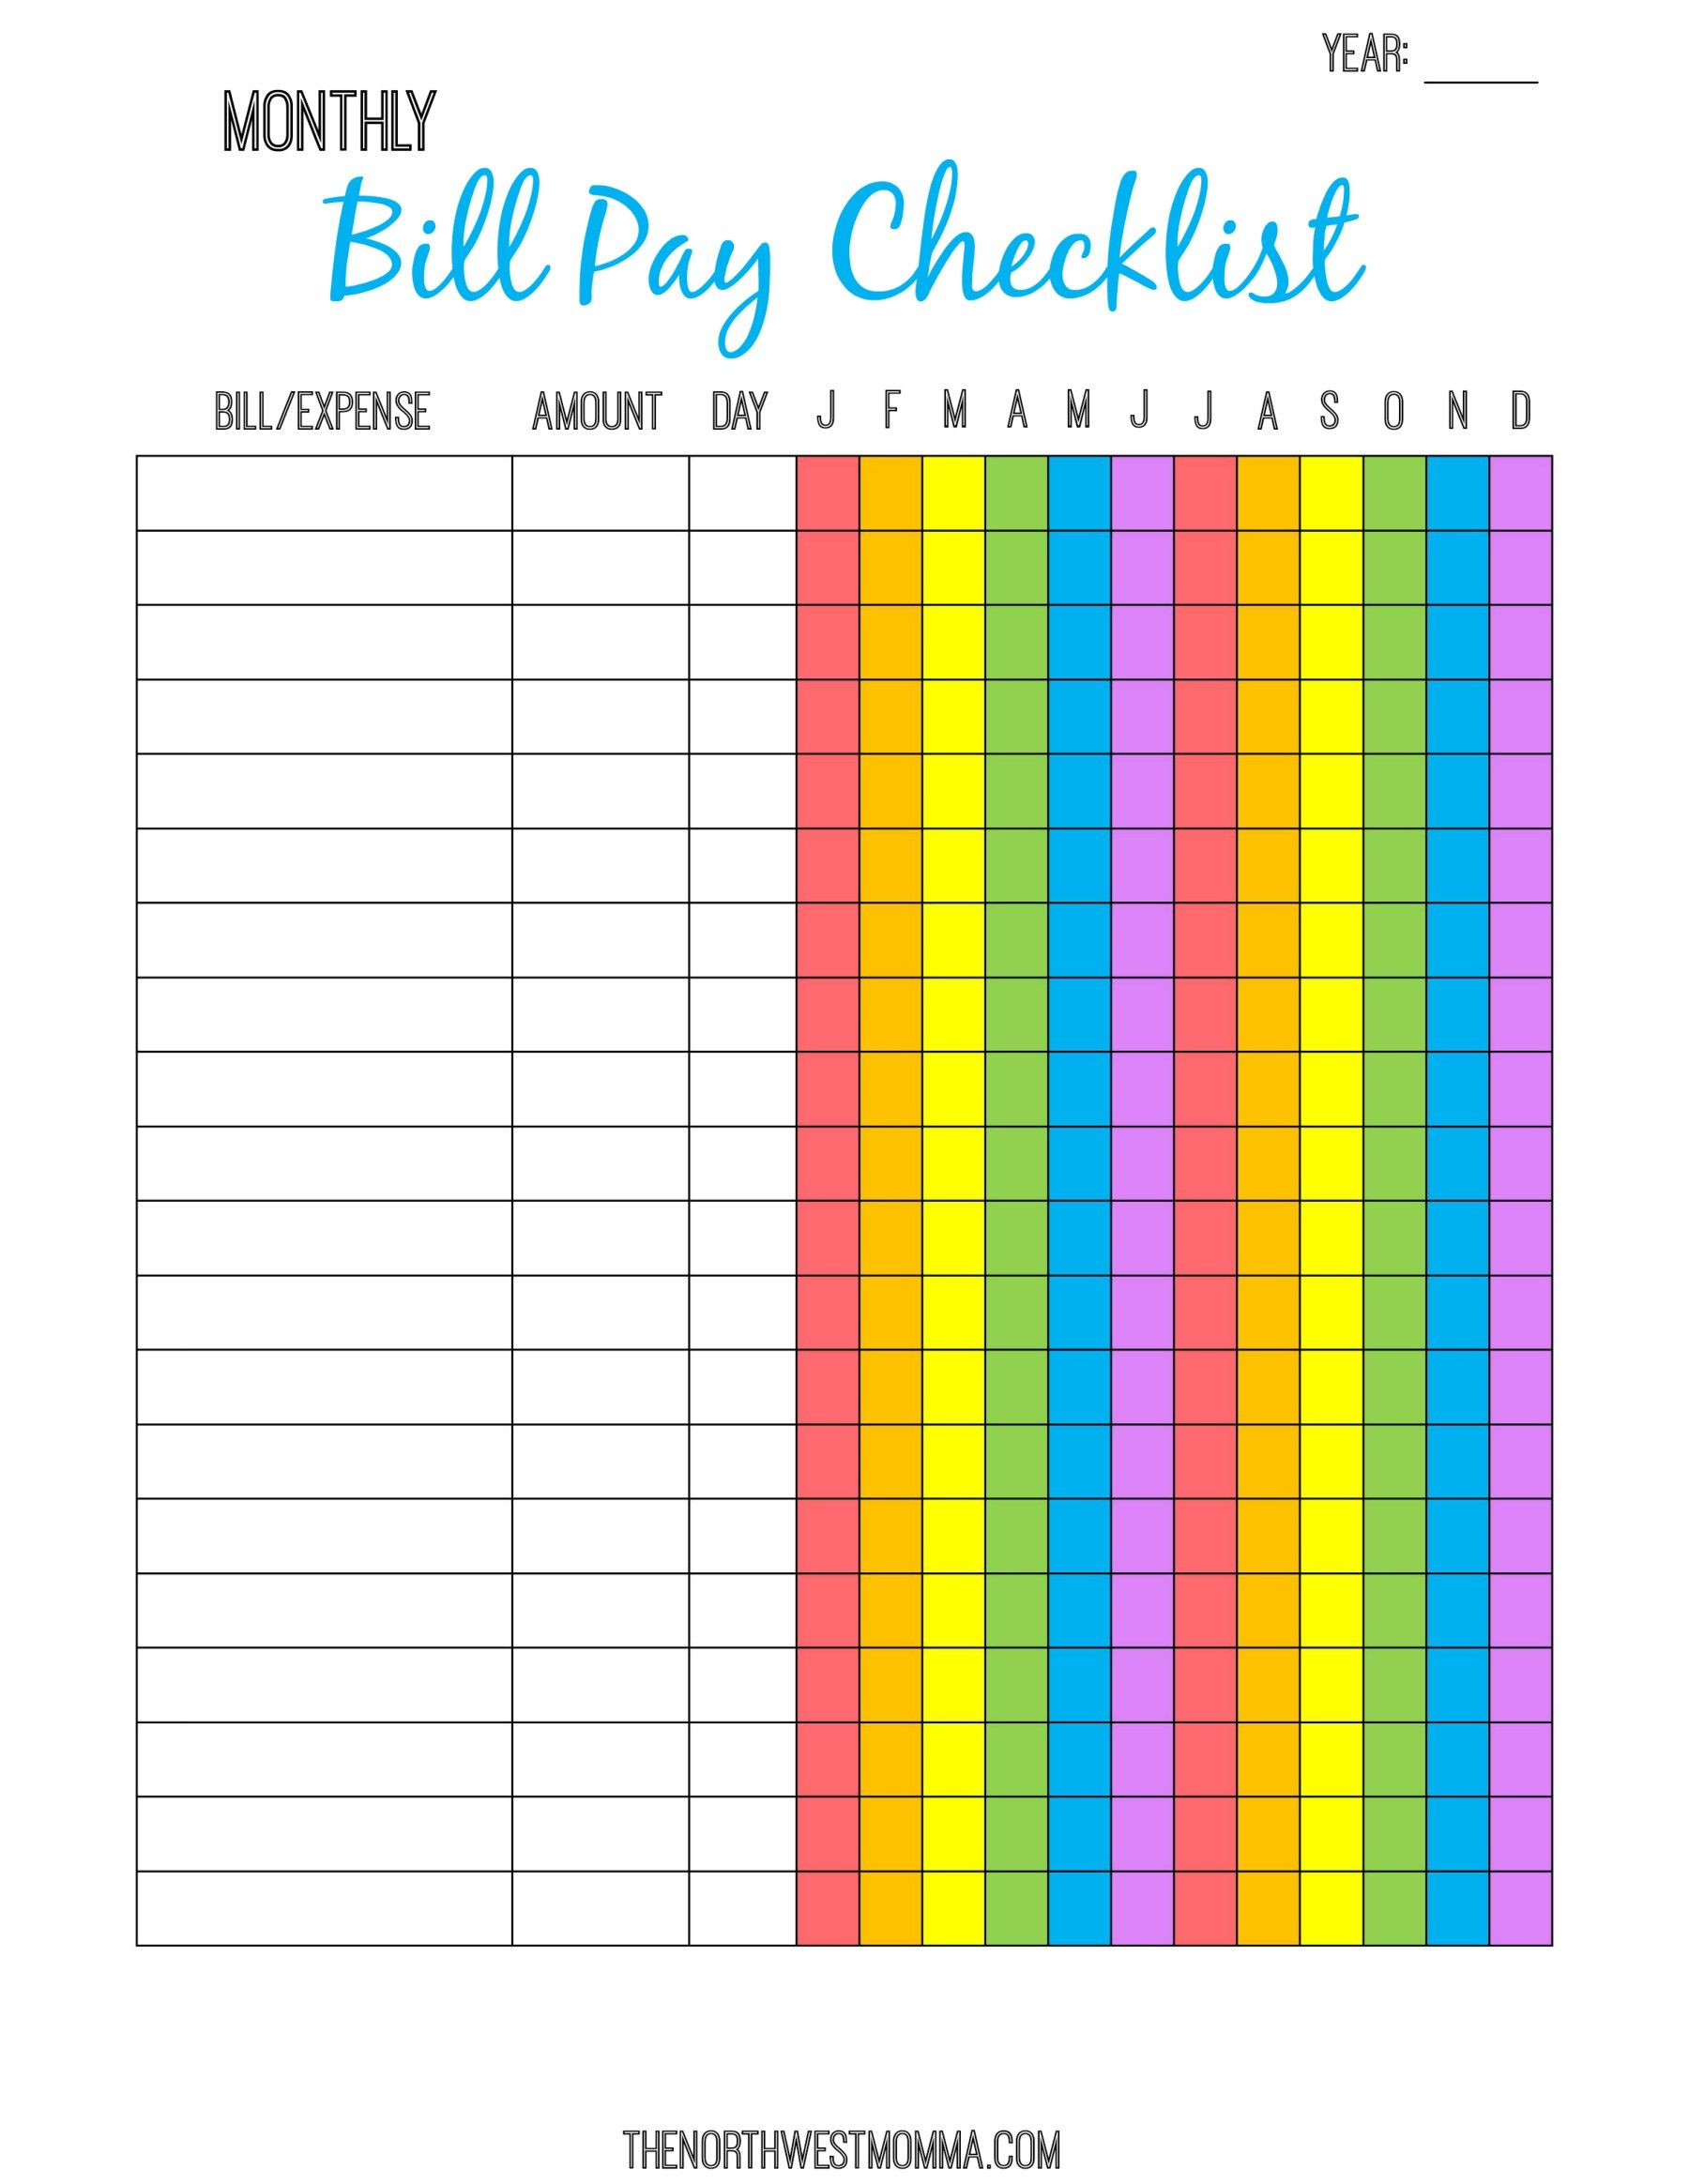 Monthly Bill Pay Checklist- Free Printable | $ Saving Money - Free Printable Monthly Bill Checklist